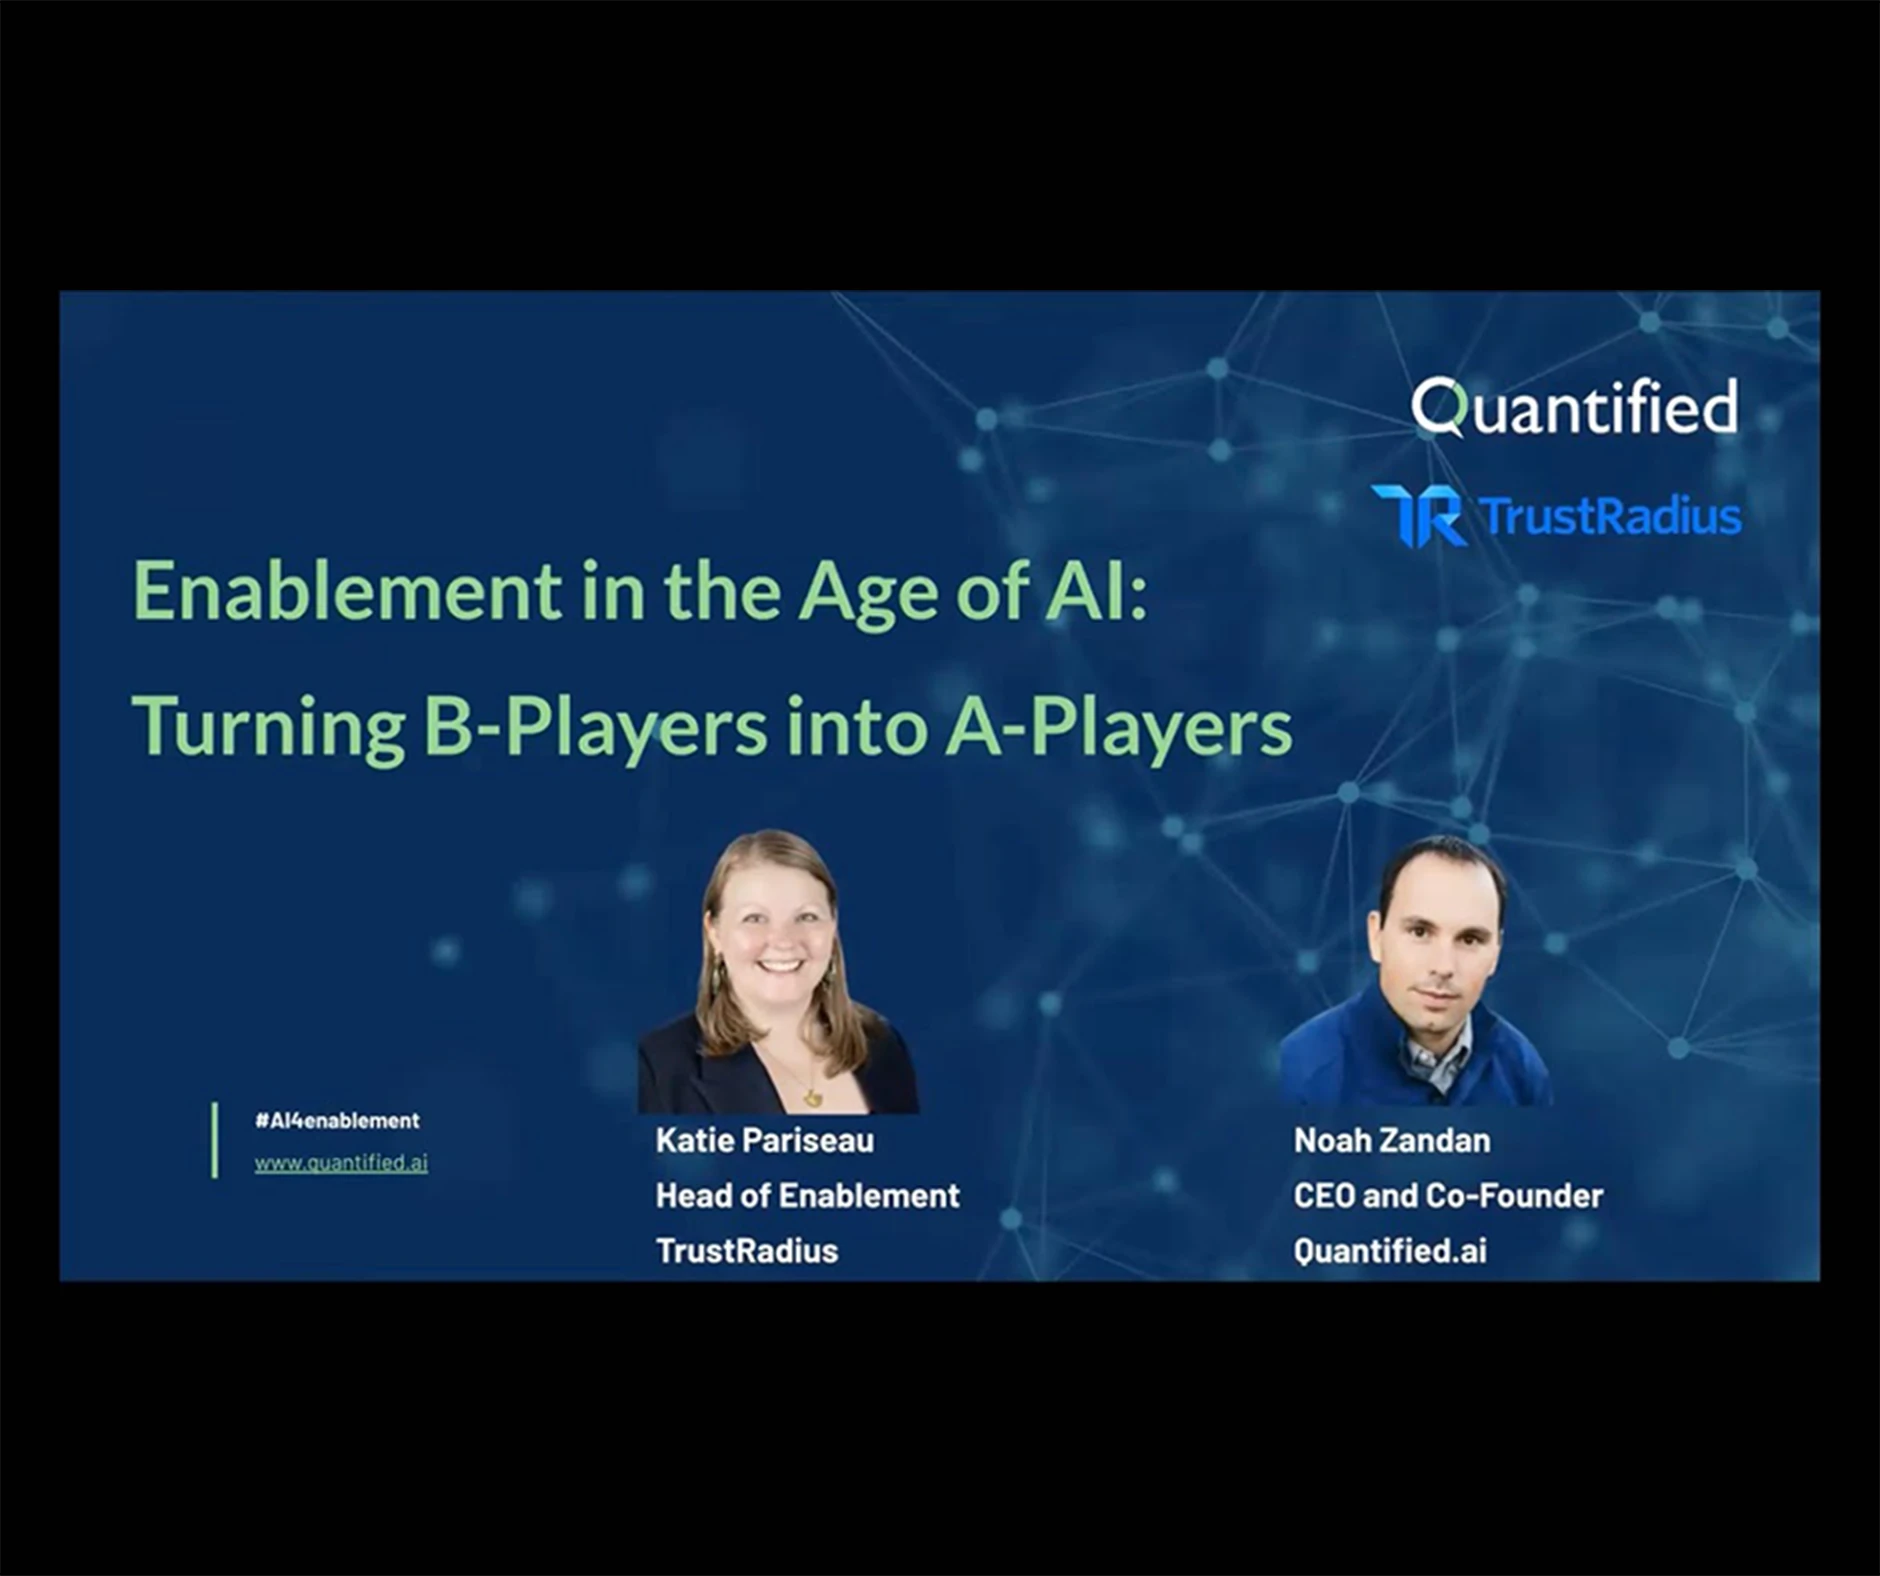 Enablement-in-the-age-of-ai-HD@2x